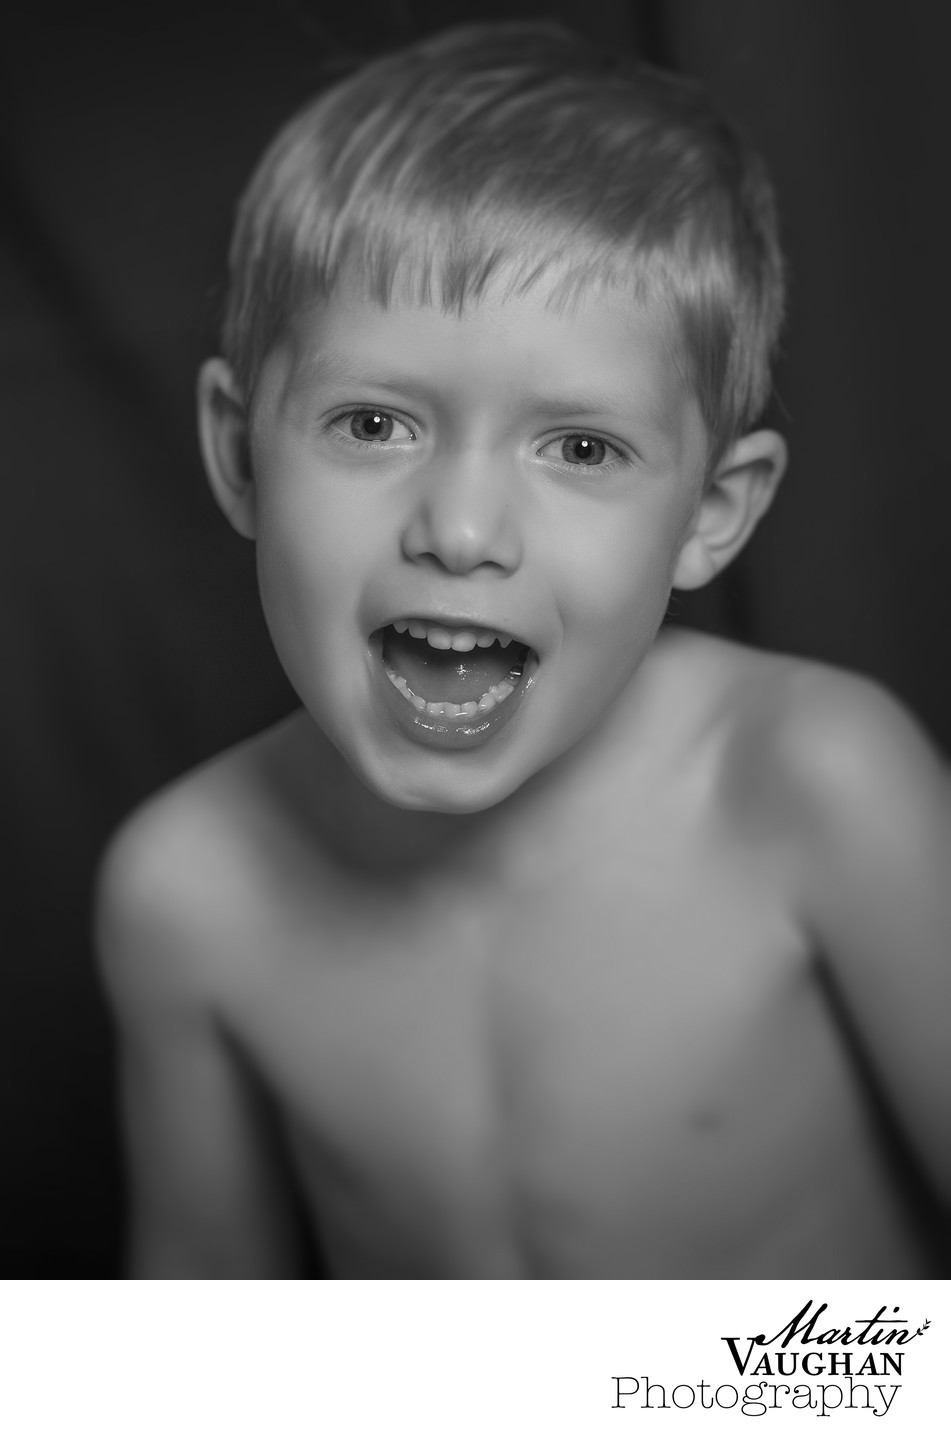 Childrens portrait photography in North Wales